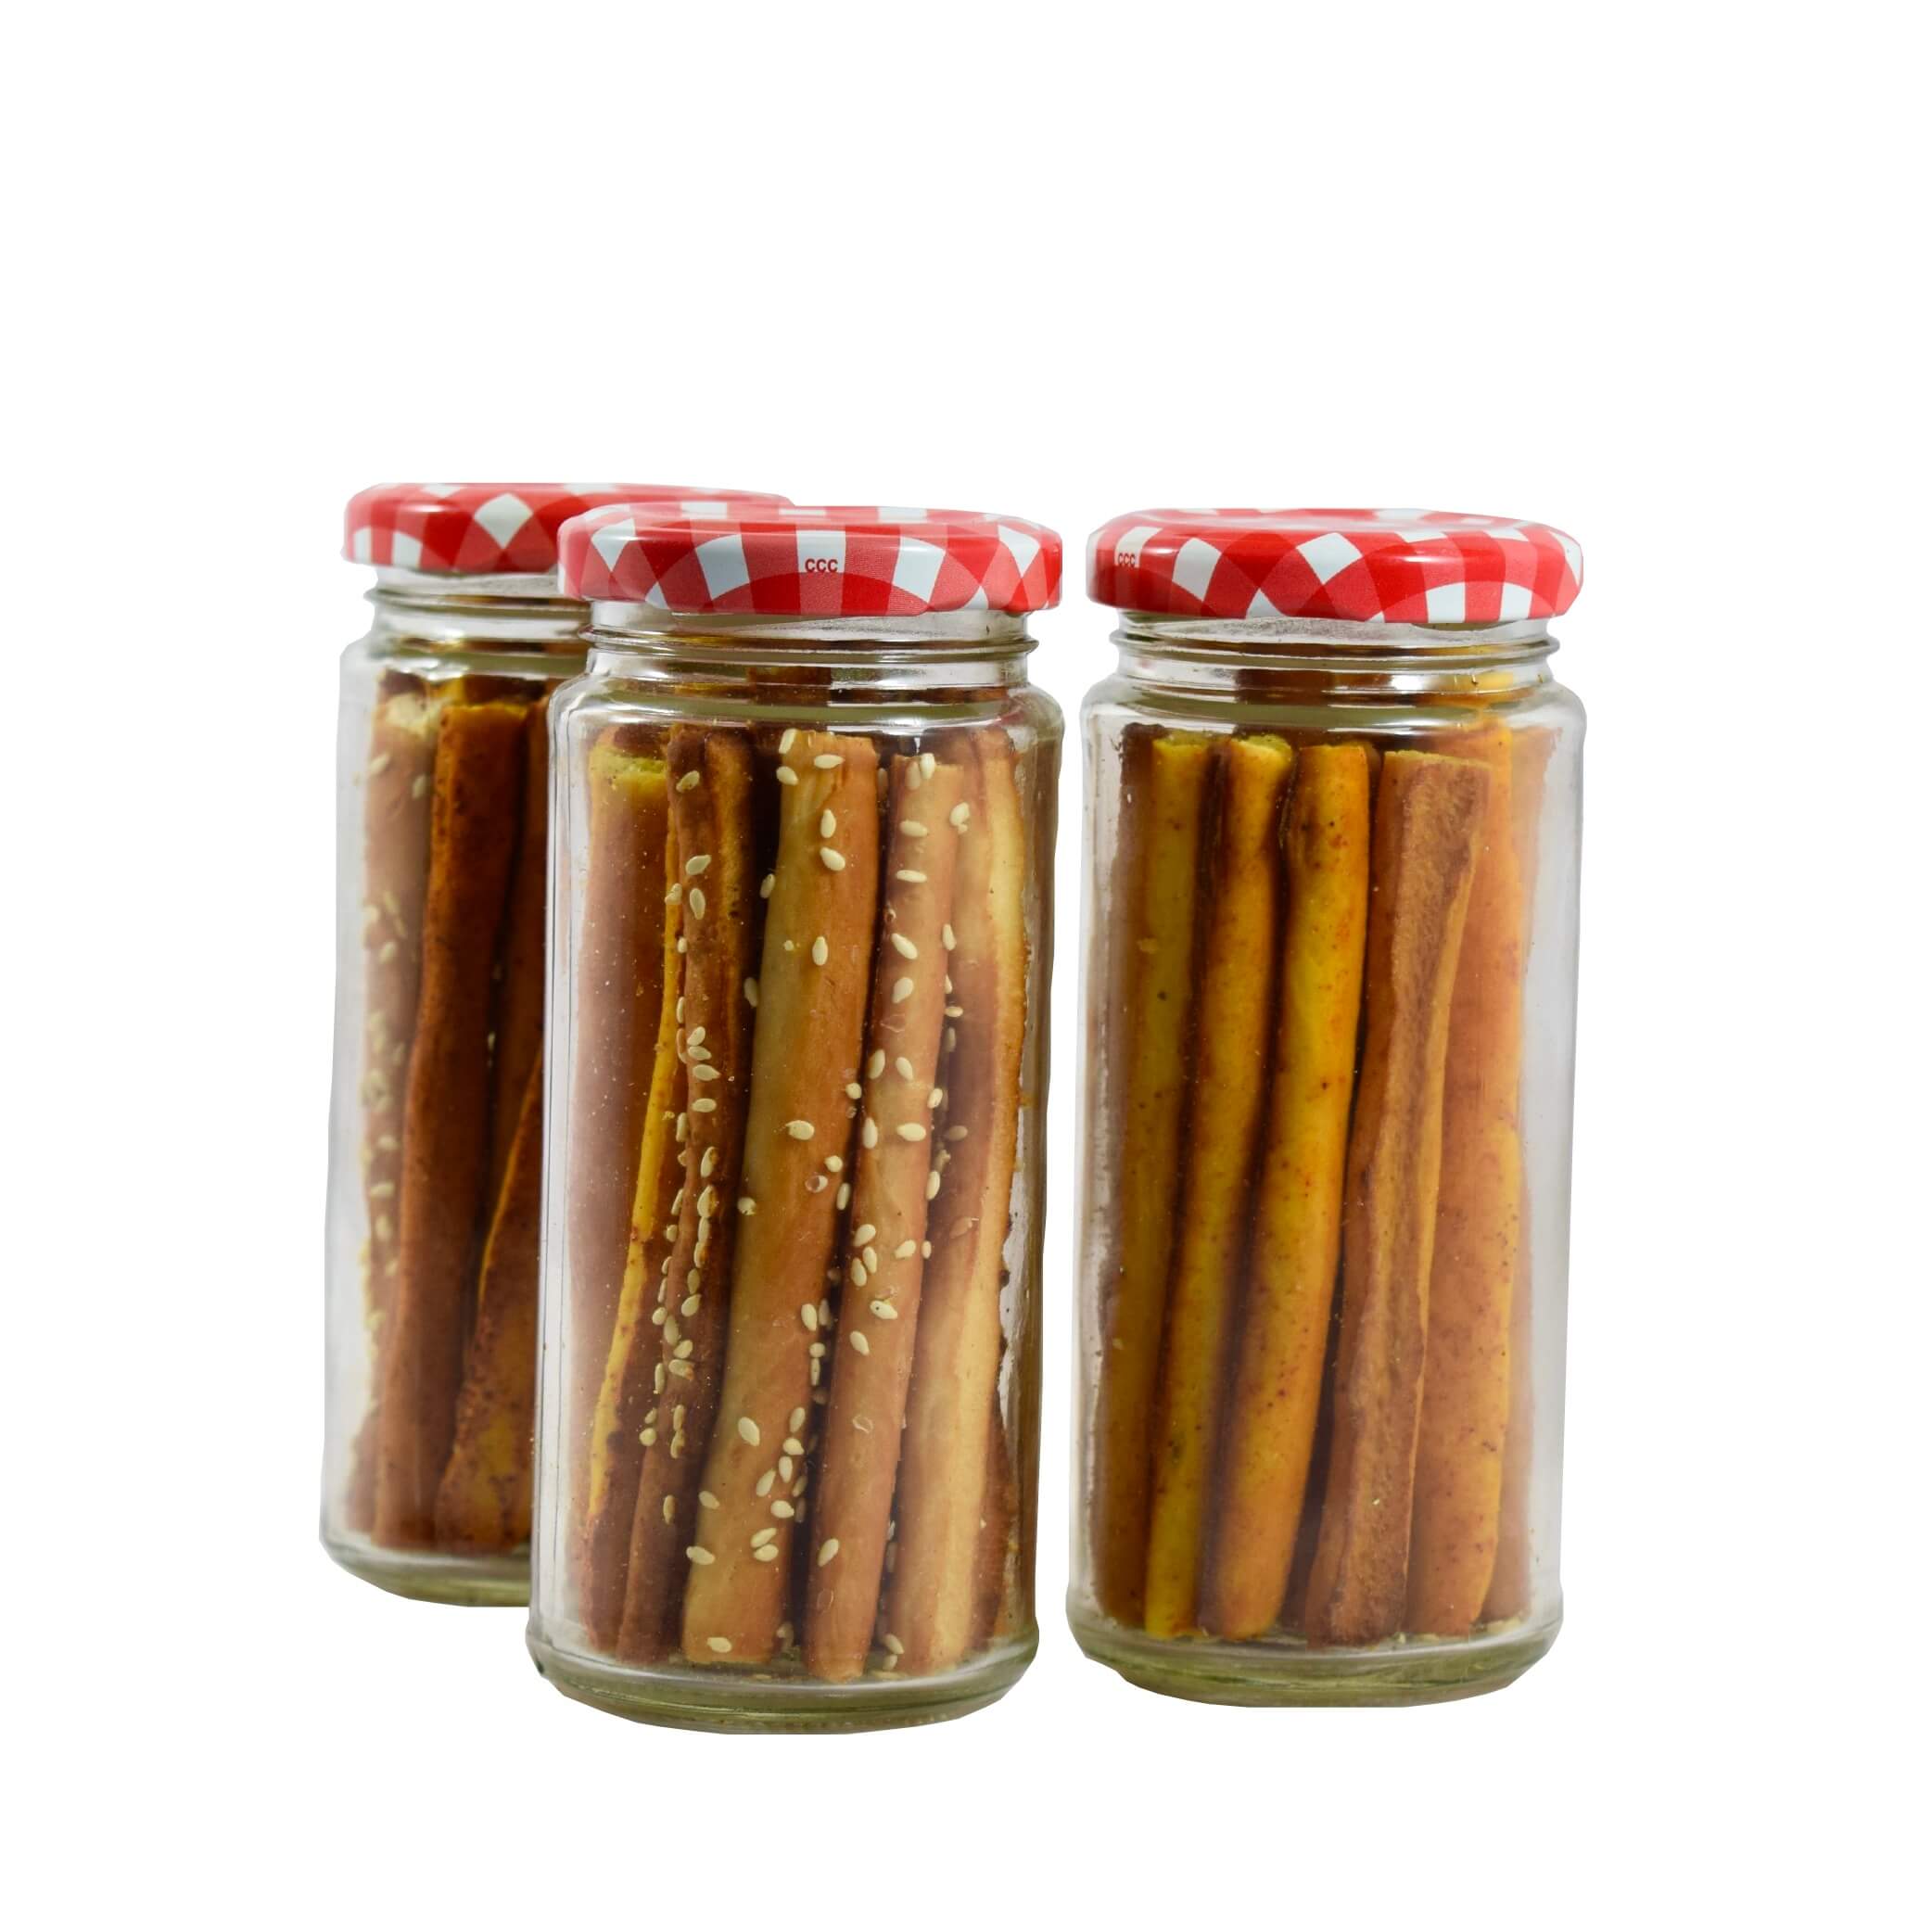 Spice Sticks - Two Wholesome Bakers